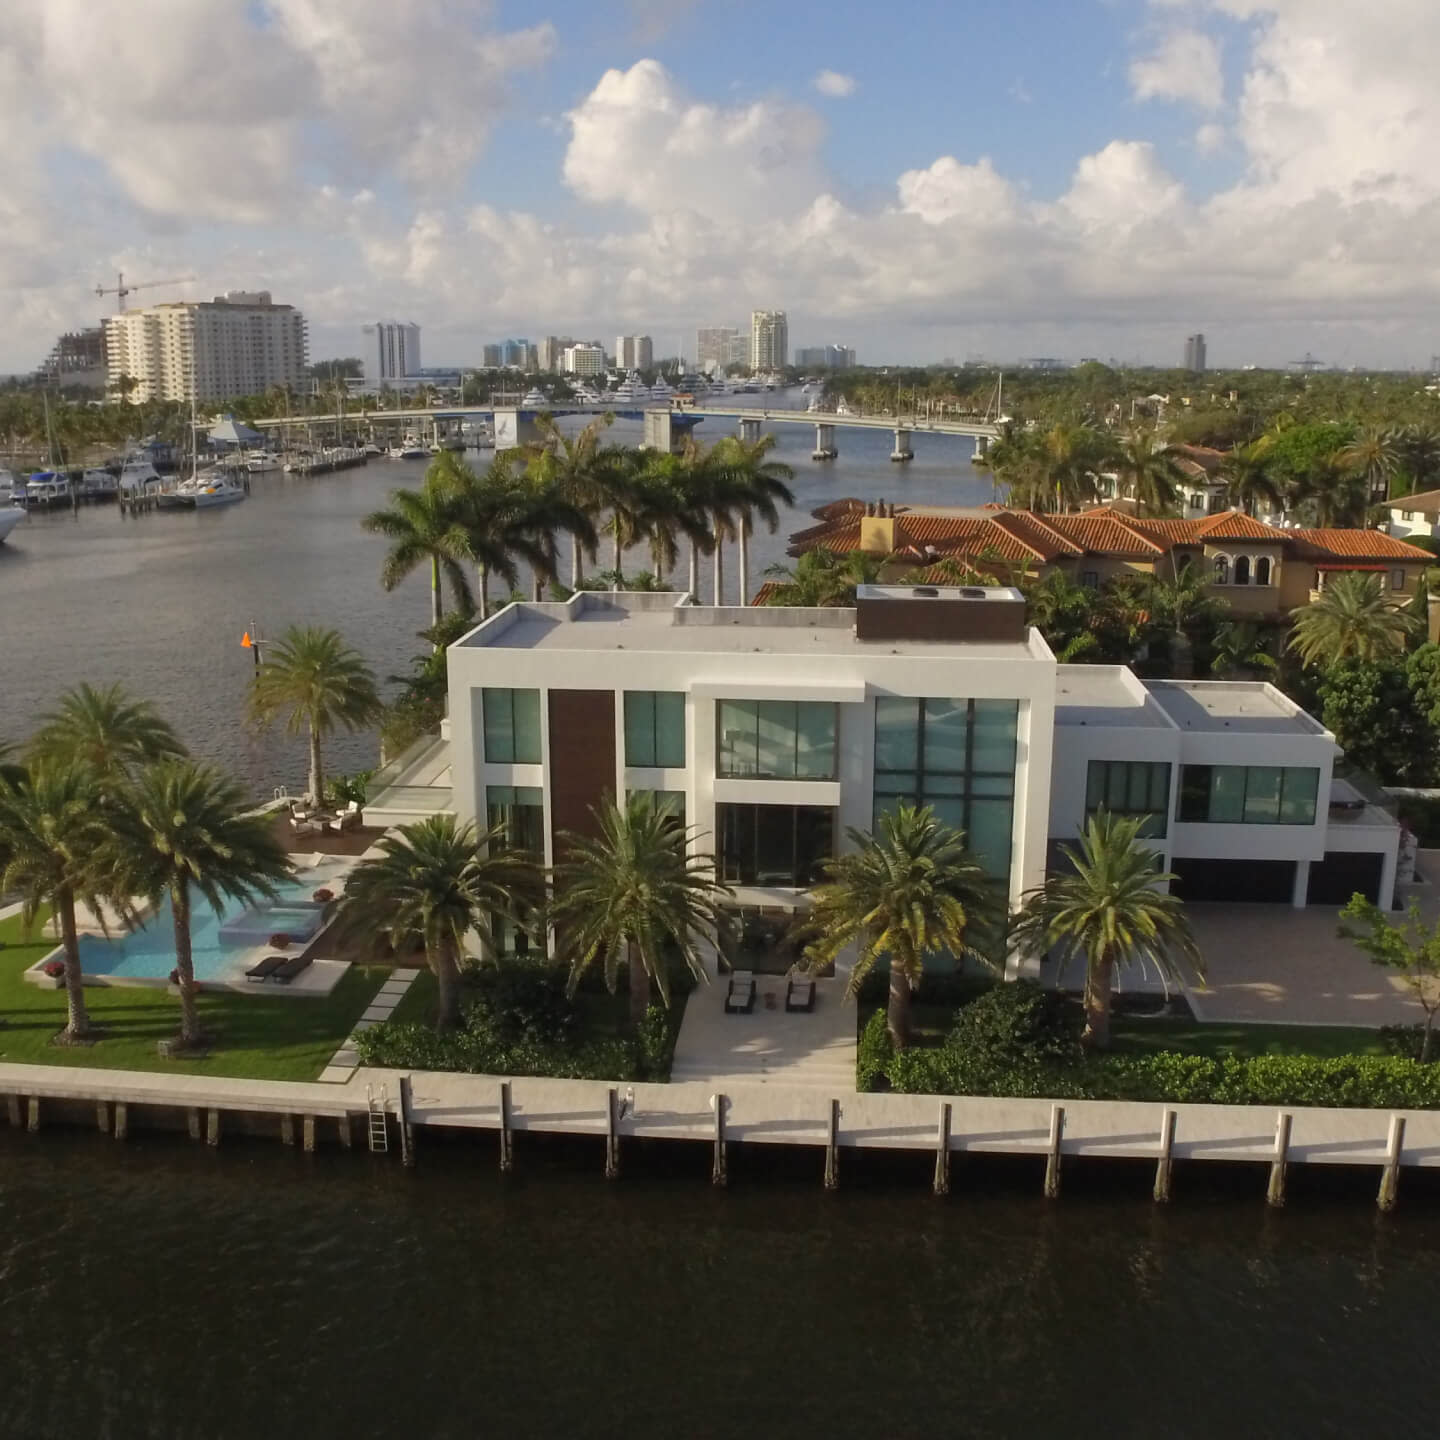 Aerial view of a boathouse and city skyline